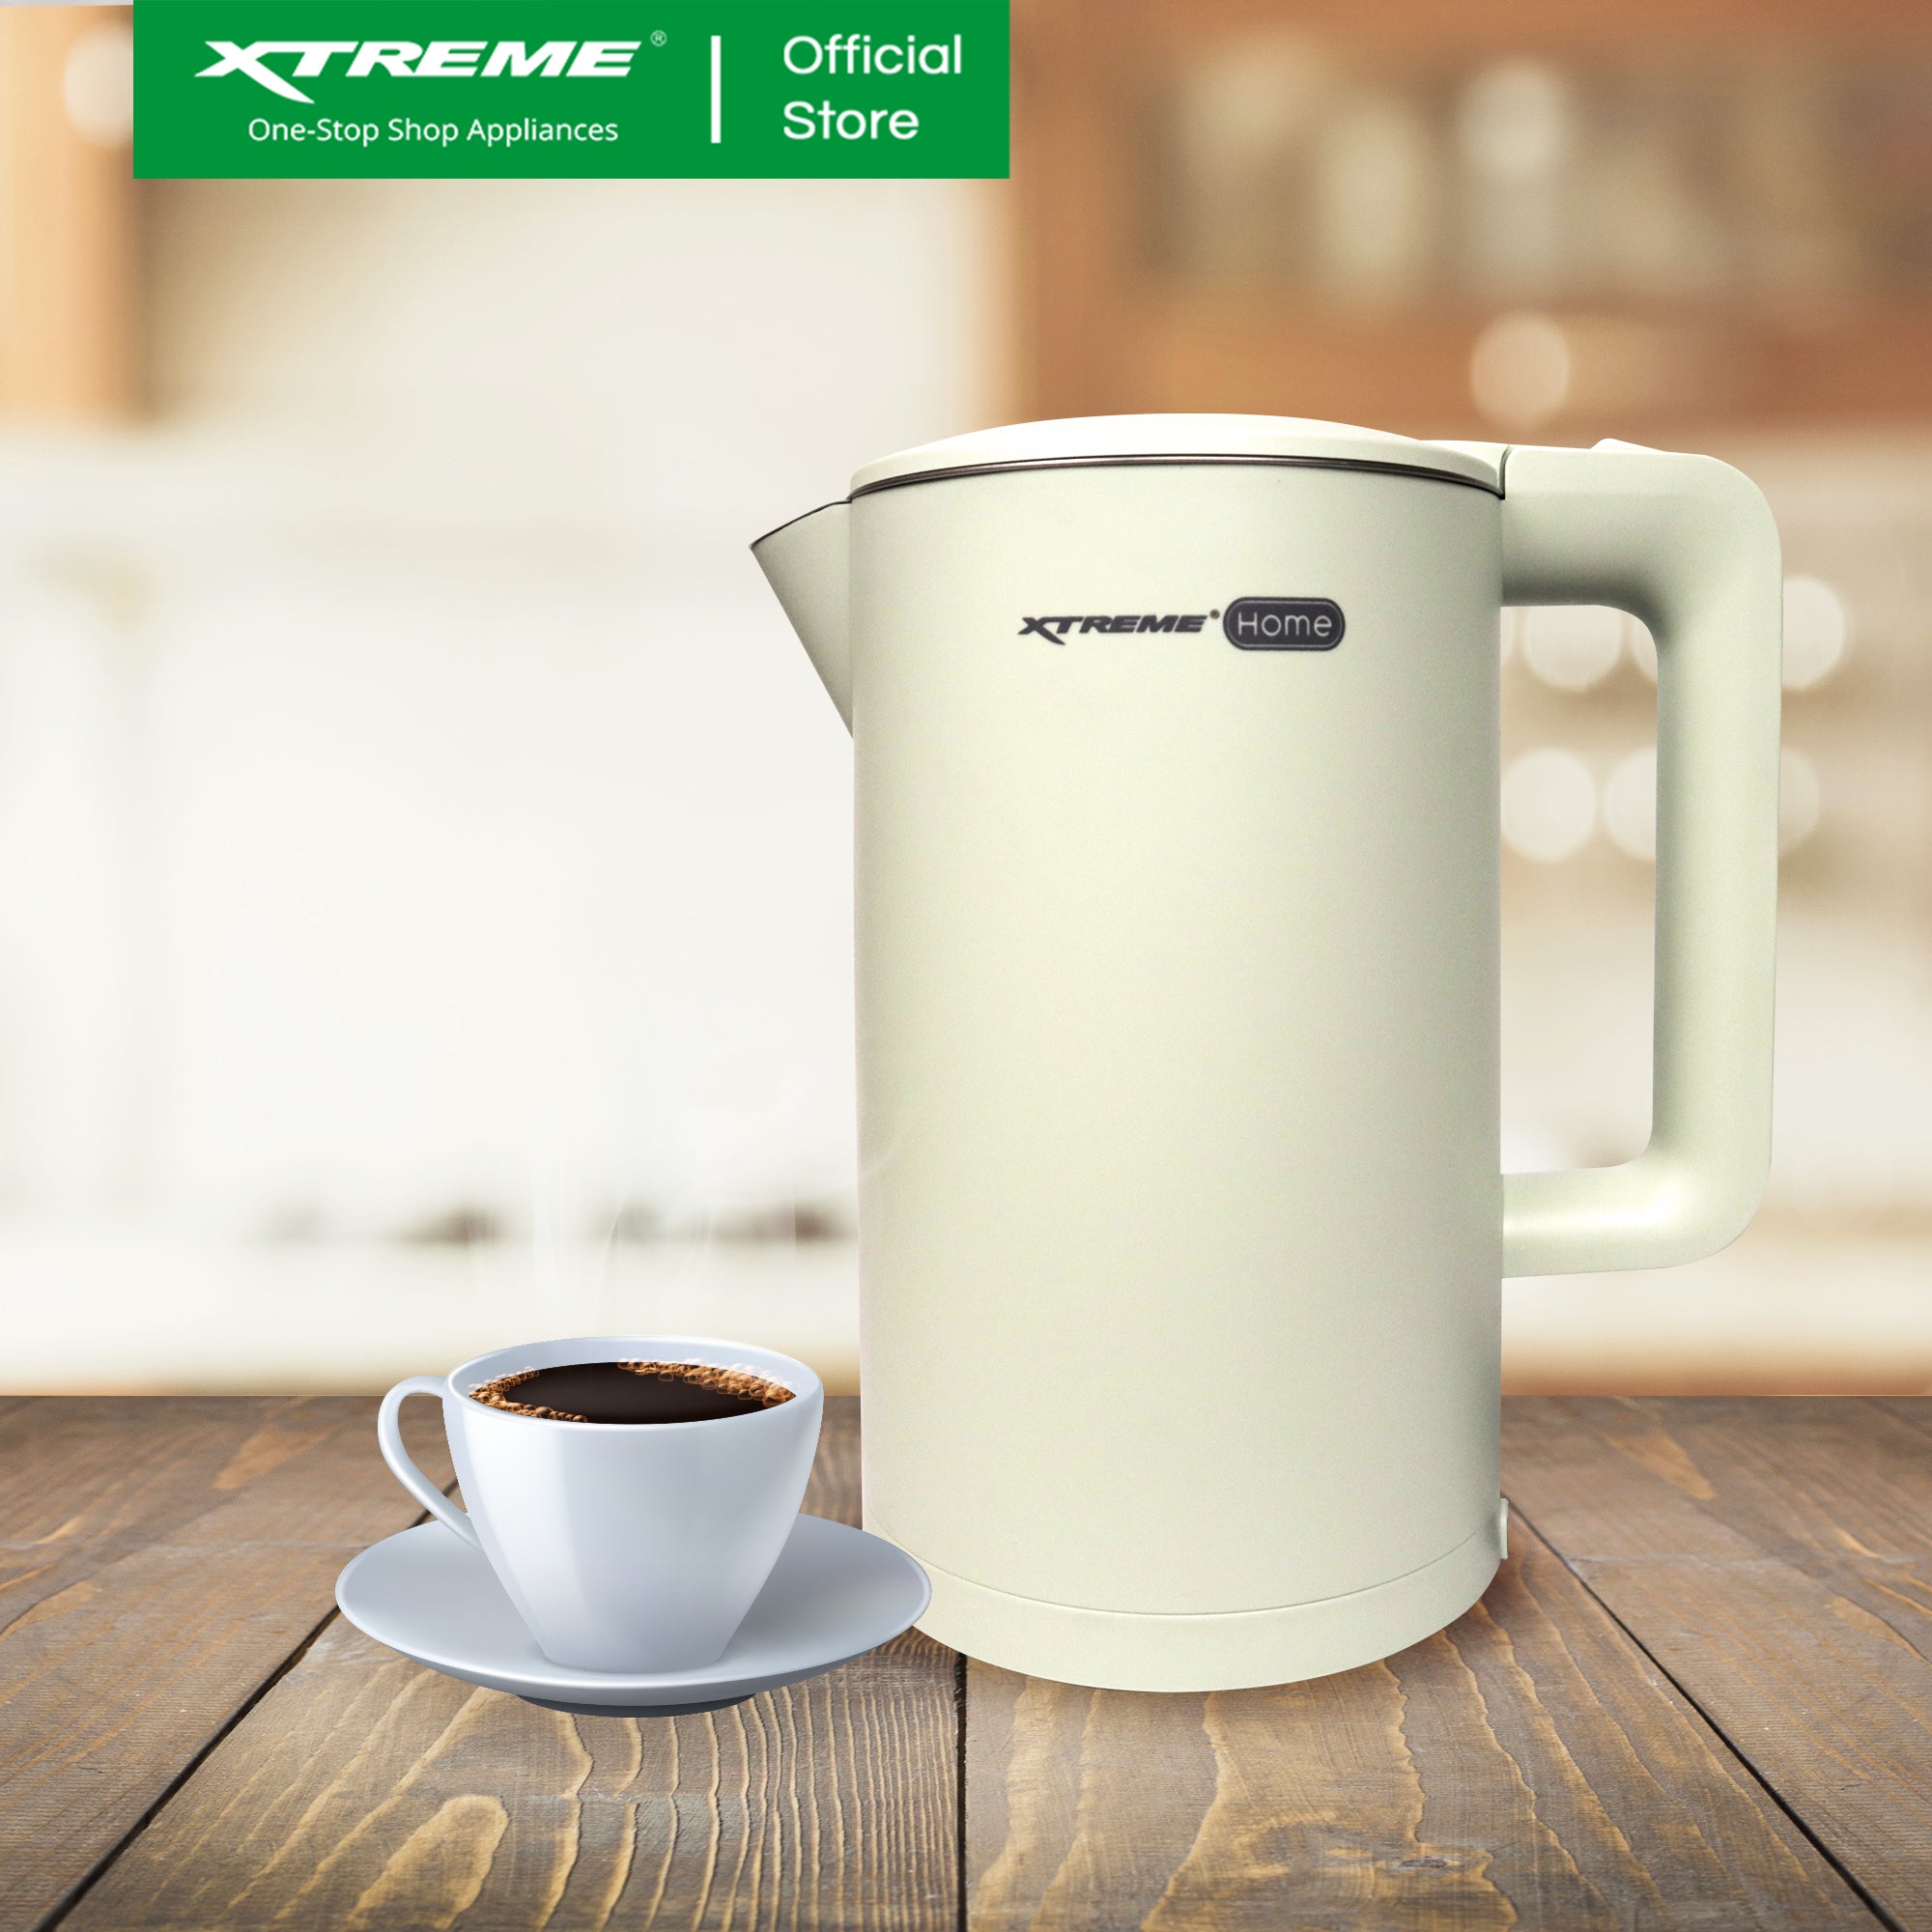 XTREME HOME 1.7L Electric Kettle Seamless Inner Pot w/ Water Indicator (Green) | XH-KT-DWCLH17GREEN